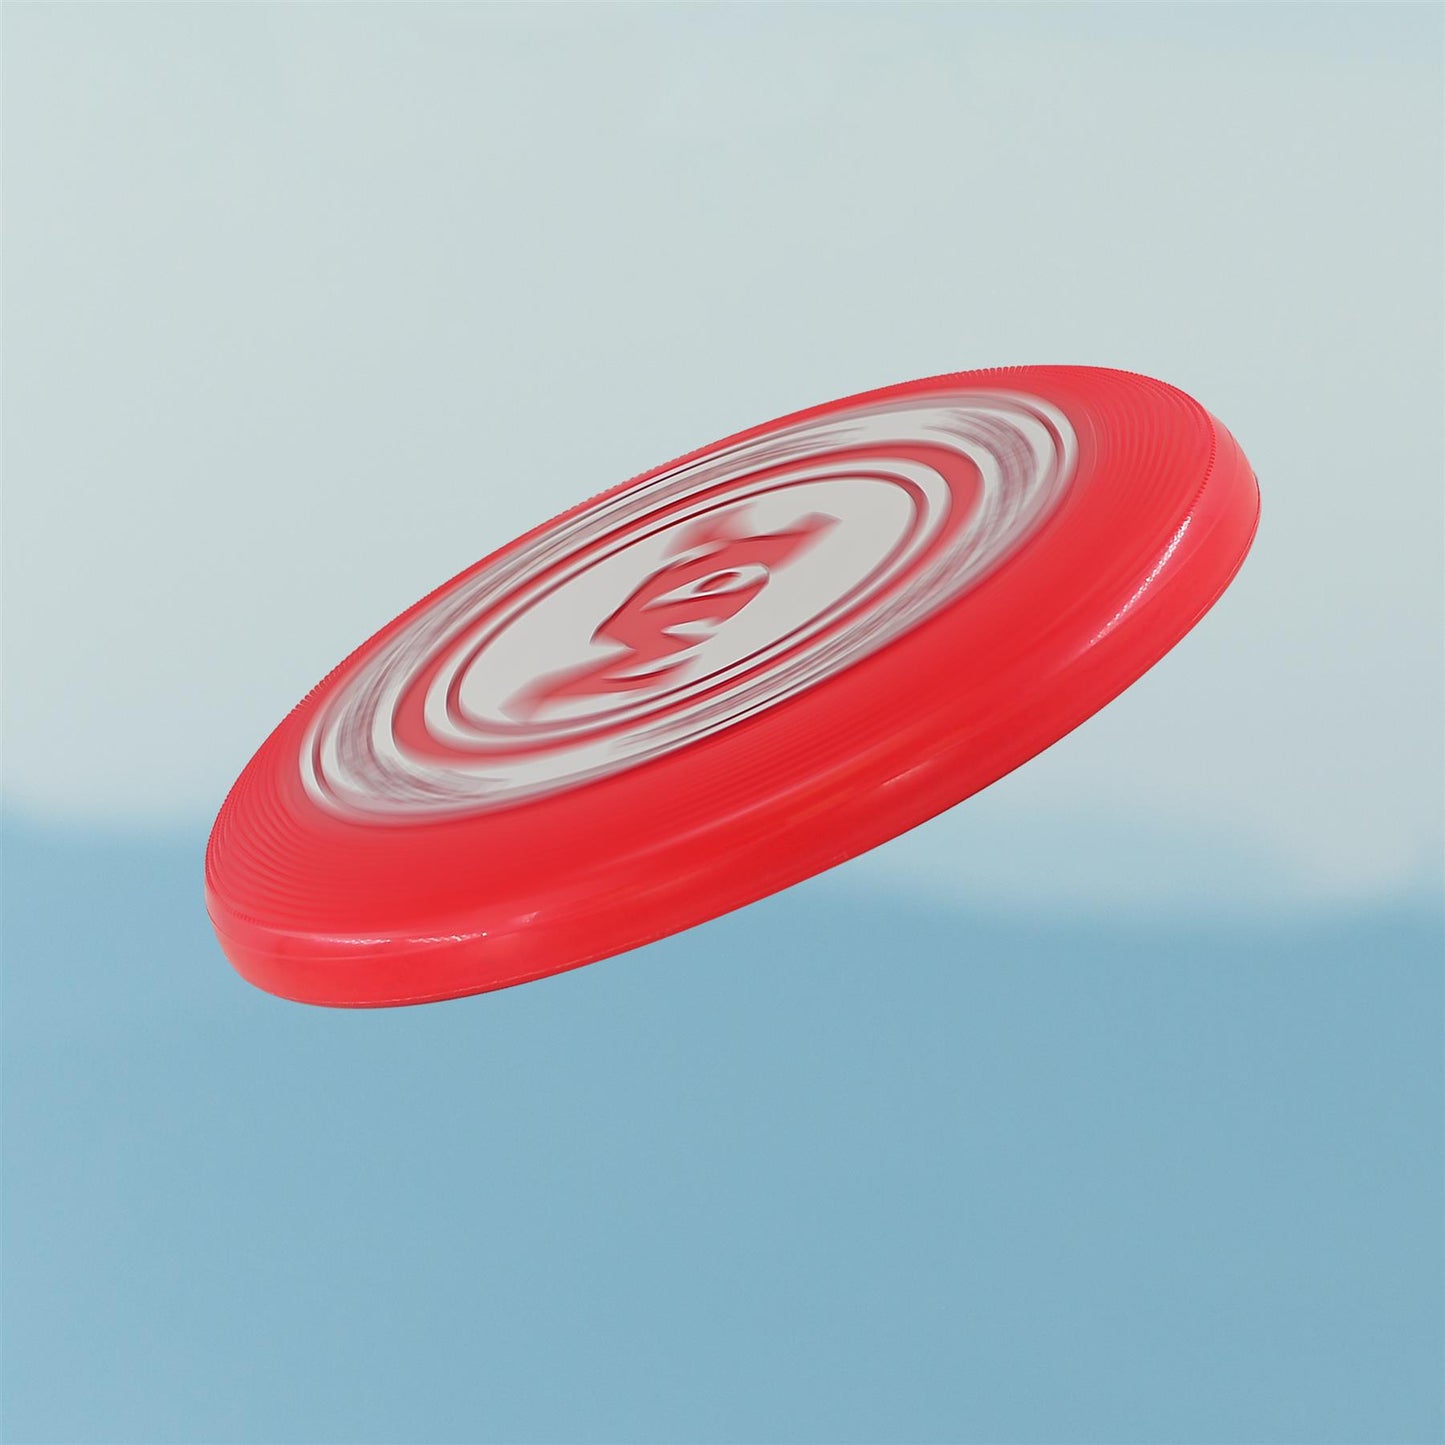 Professional Frisbee 4 Assorted Colours by The Magic Toy Shop - UKBuyZone